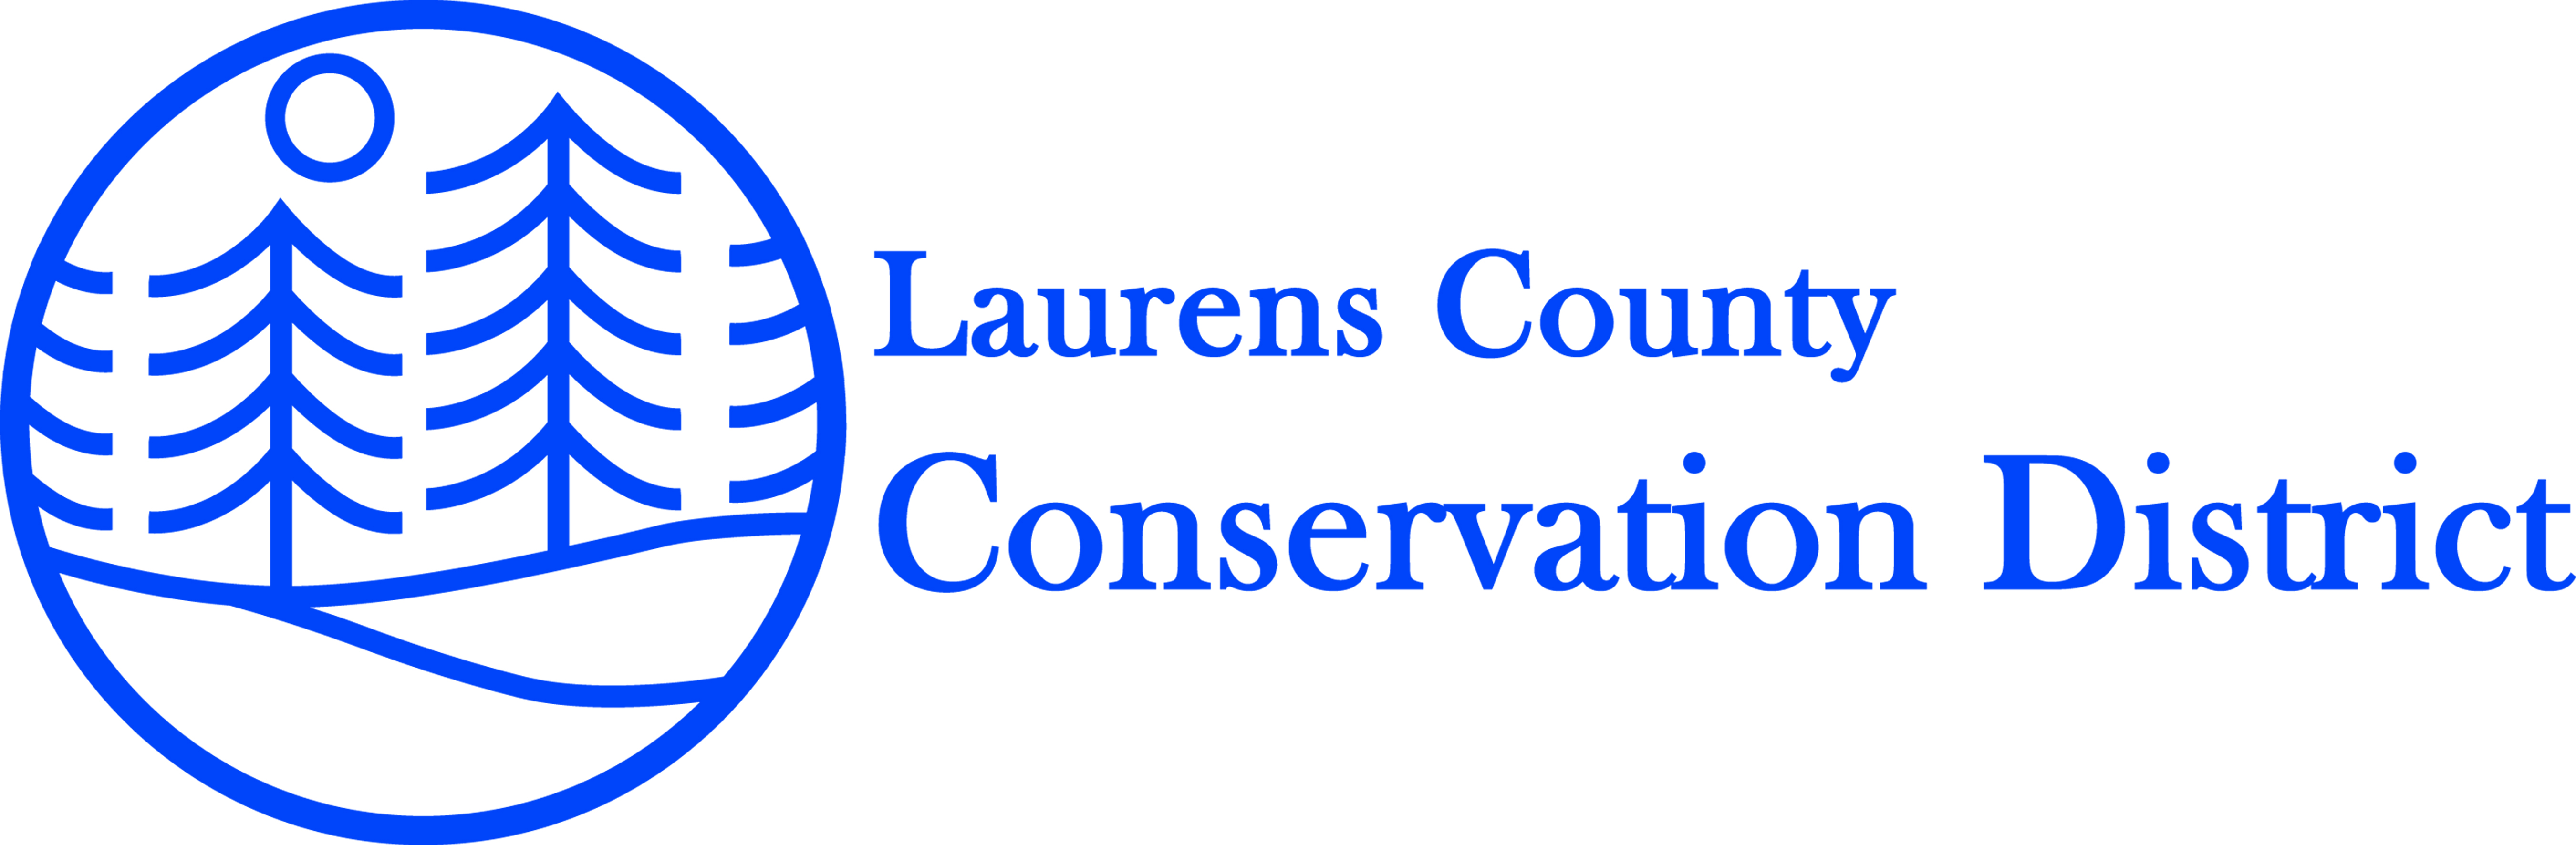 Laurens County Conservation District